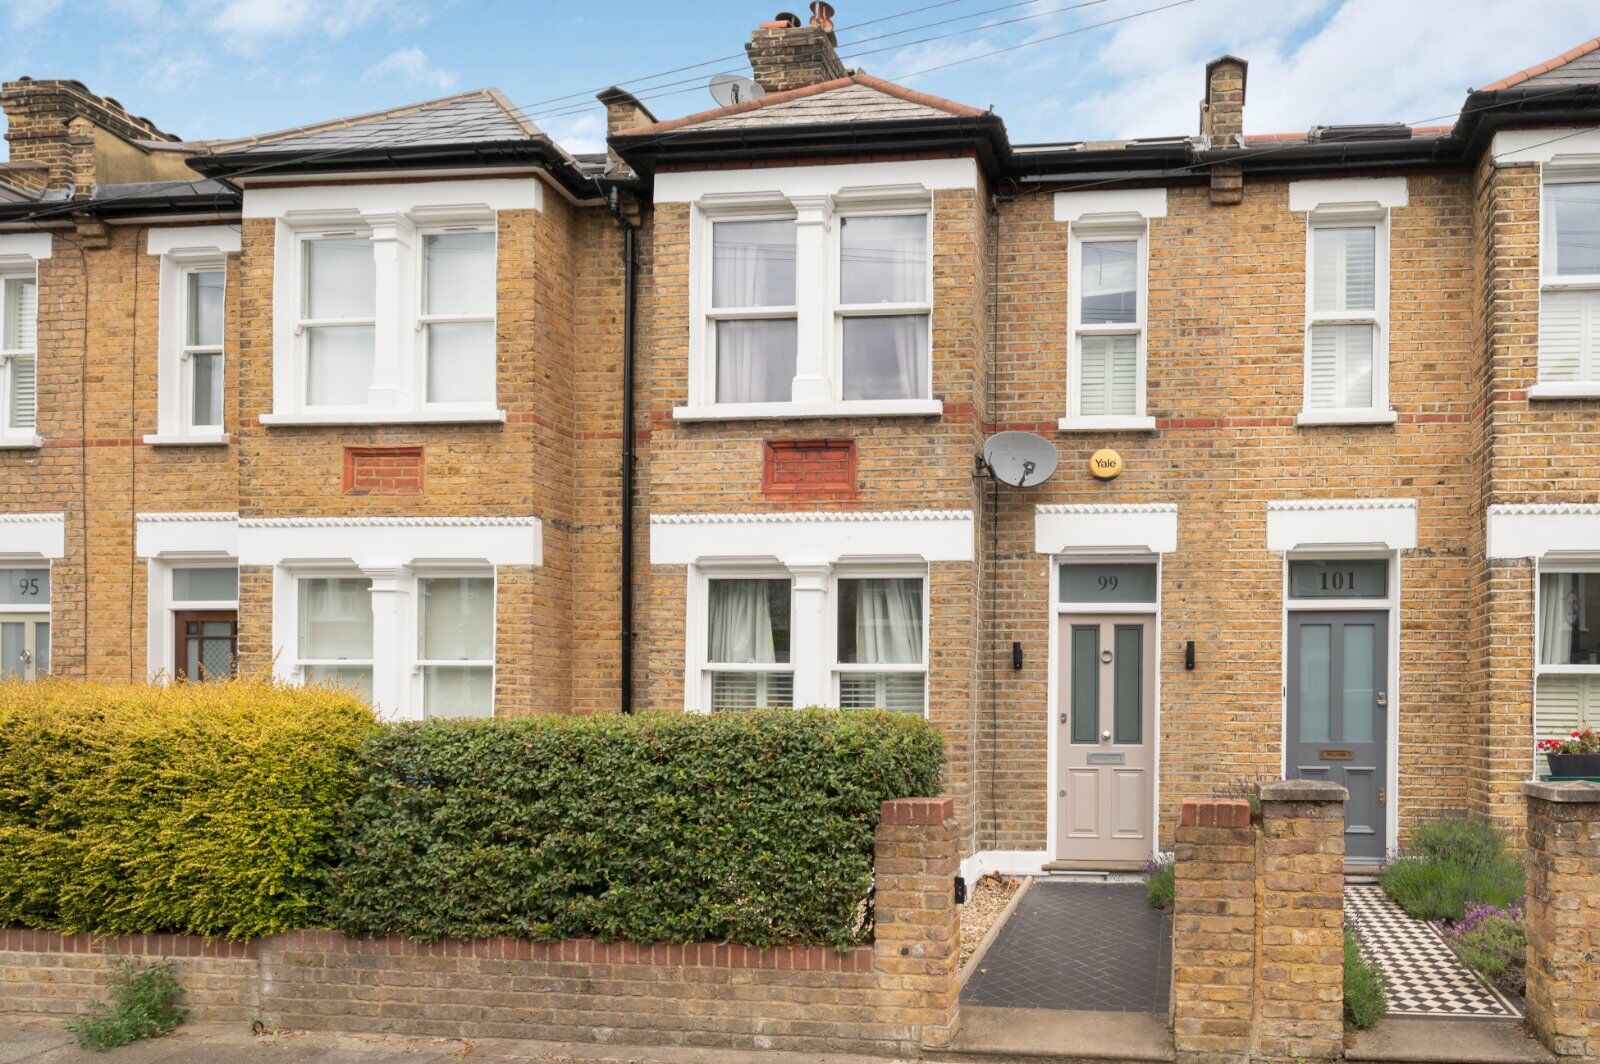 4 bedroom mid terraced house for sale Florence Road, Wimbledon, SW19, main image